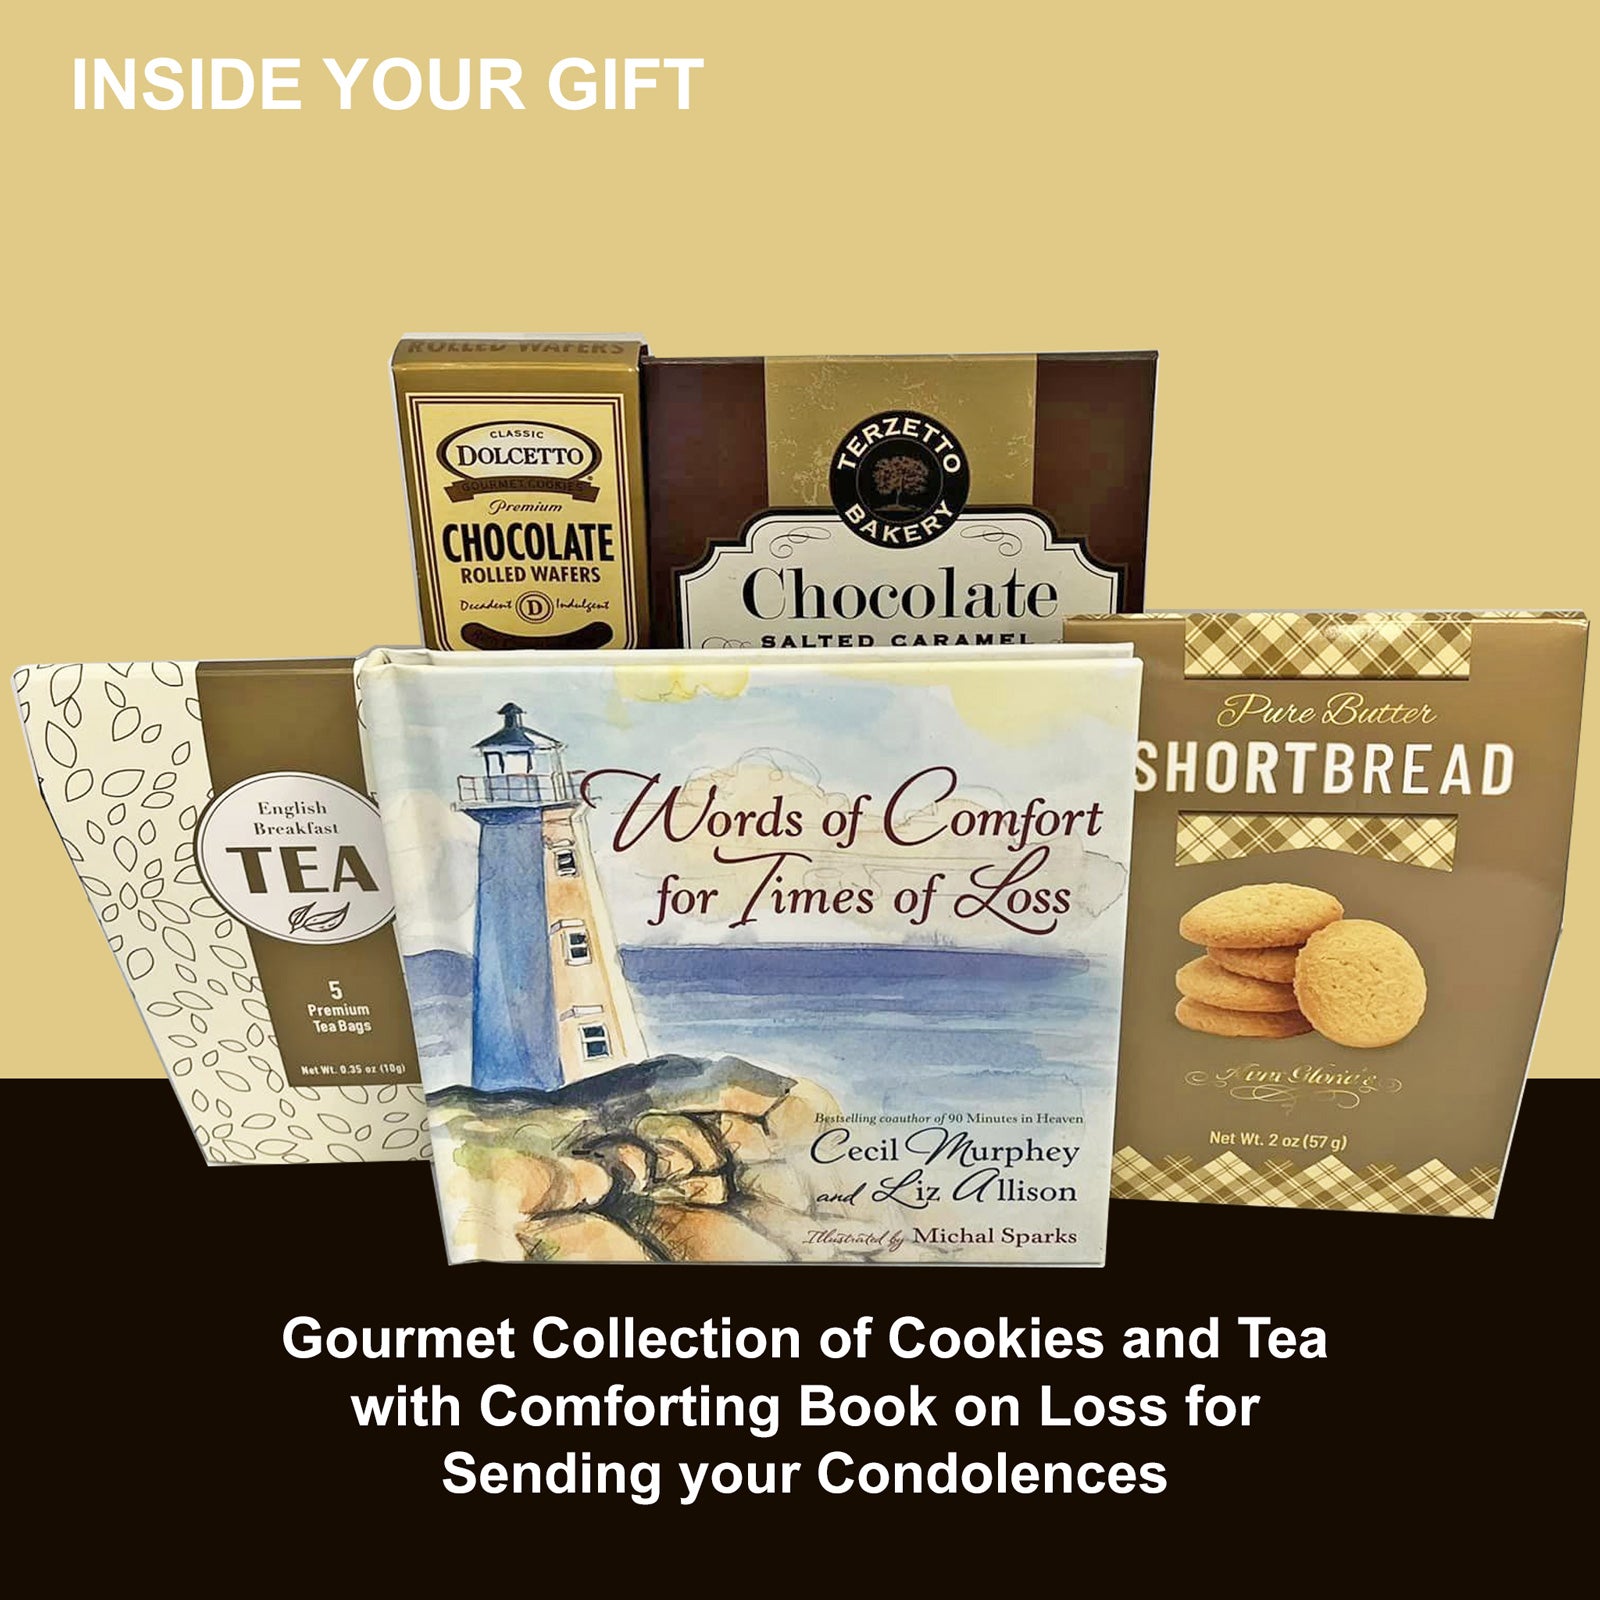 Diy Tea And Biscuits Gift Set, Mug, Cookie Mix And Tea By Katie Bakes |  notonthehighstreet.com